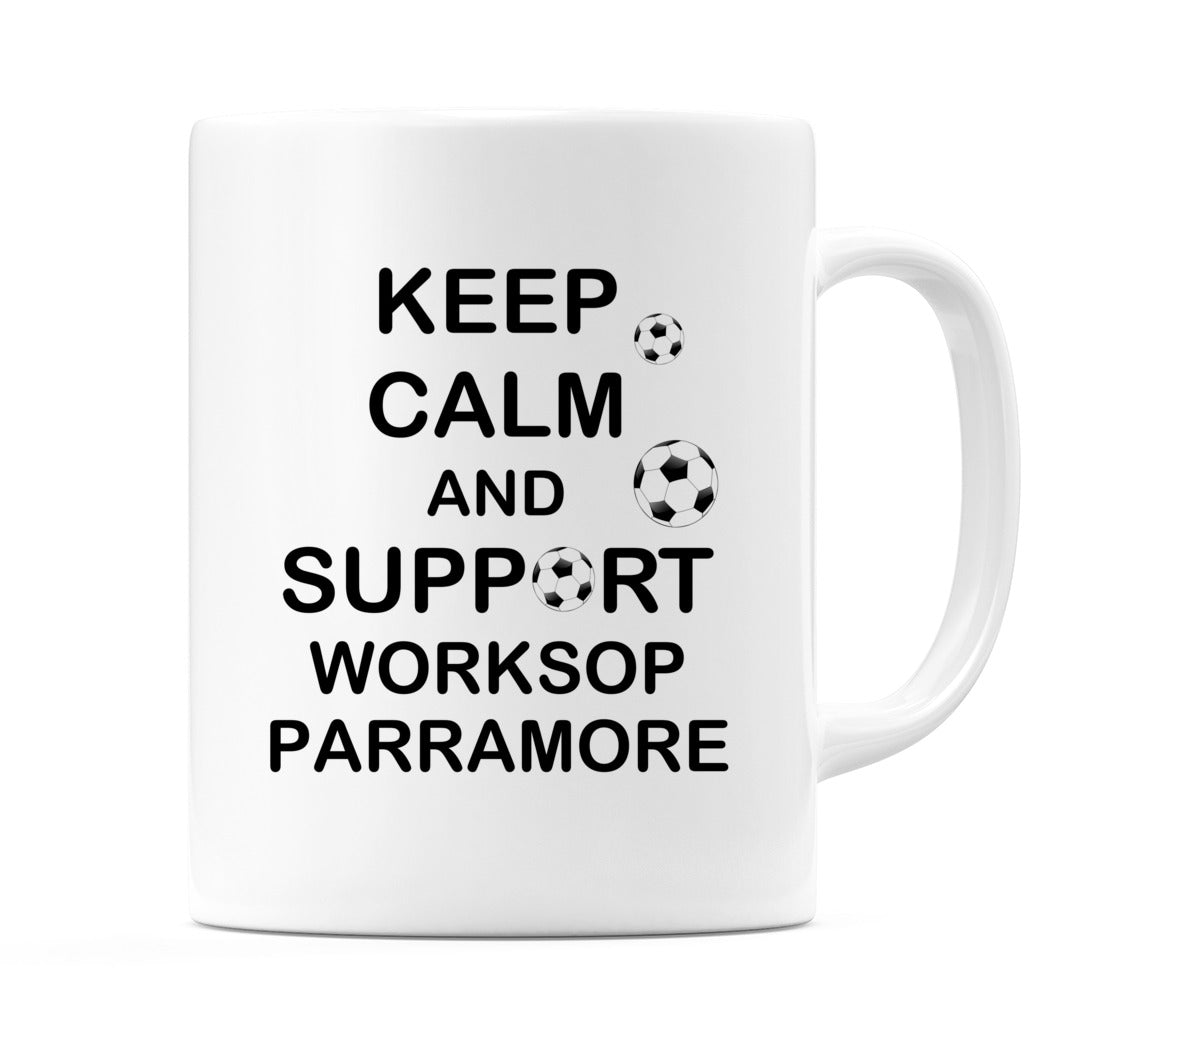 Keep Calm And Support Worksop Parramore Mug